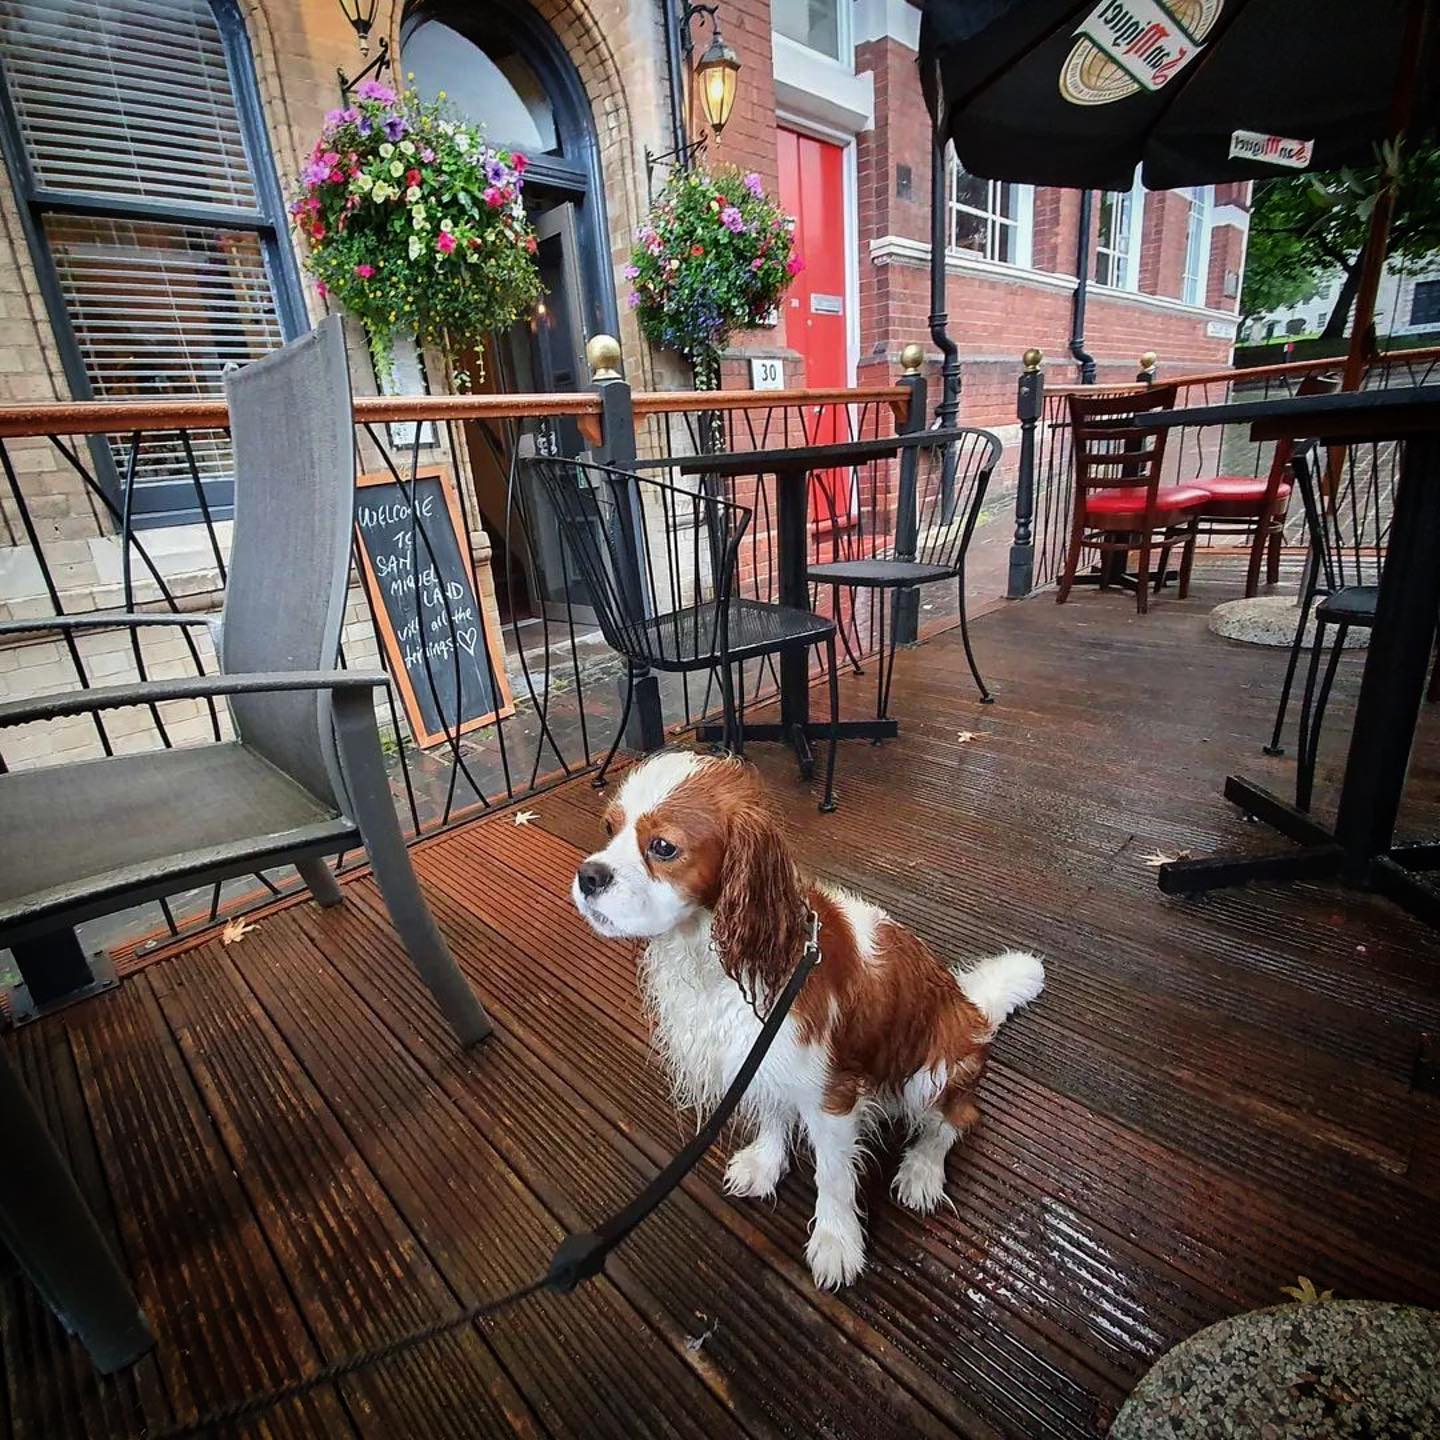 All dogs are welcome to come and enjoy the sun on our Patio 🐶☀️☀️☀️

#dogfriendly #birmingham #jq #jewelleryquarter #restaurant